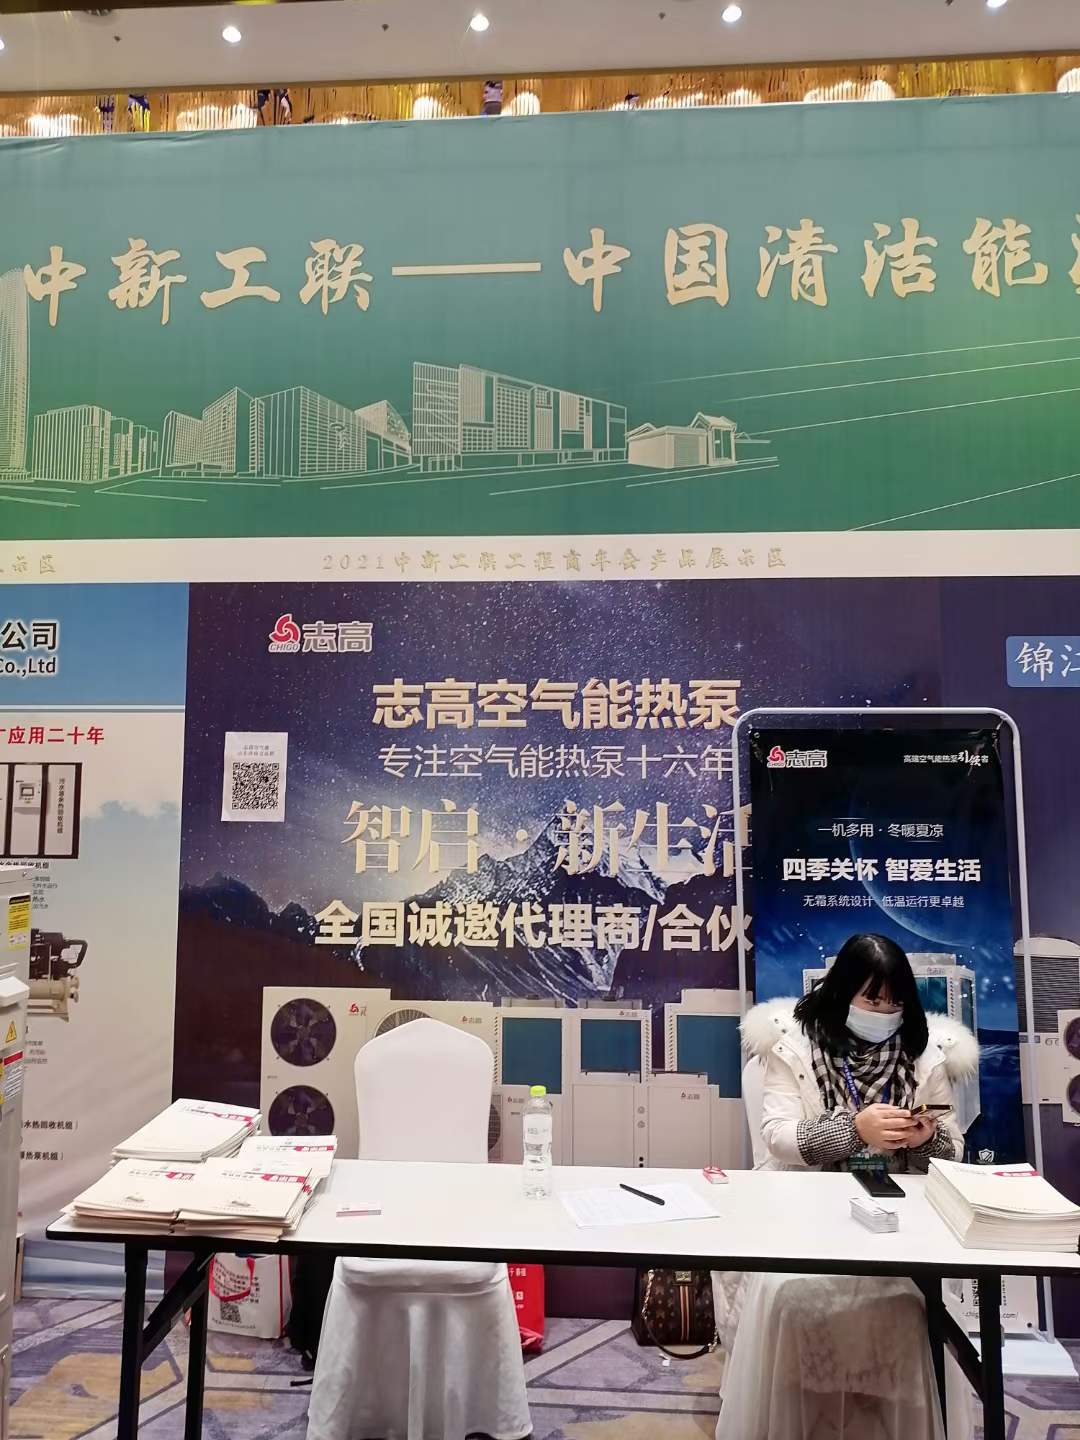 2021 Annual Meeting of China Singapore Federation of Industry and Commerce Engineers in Jinan, Shandong Province - GEME Air Energy sincerely invites national agents/partners to join in